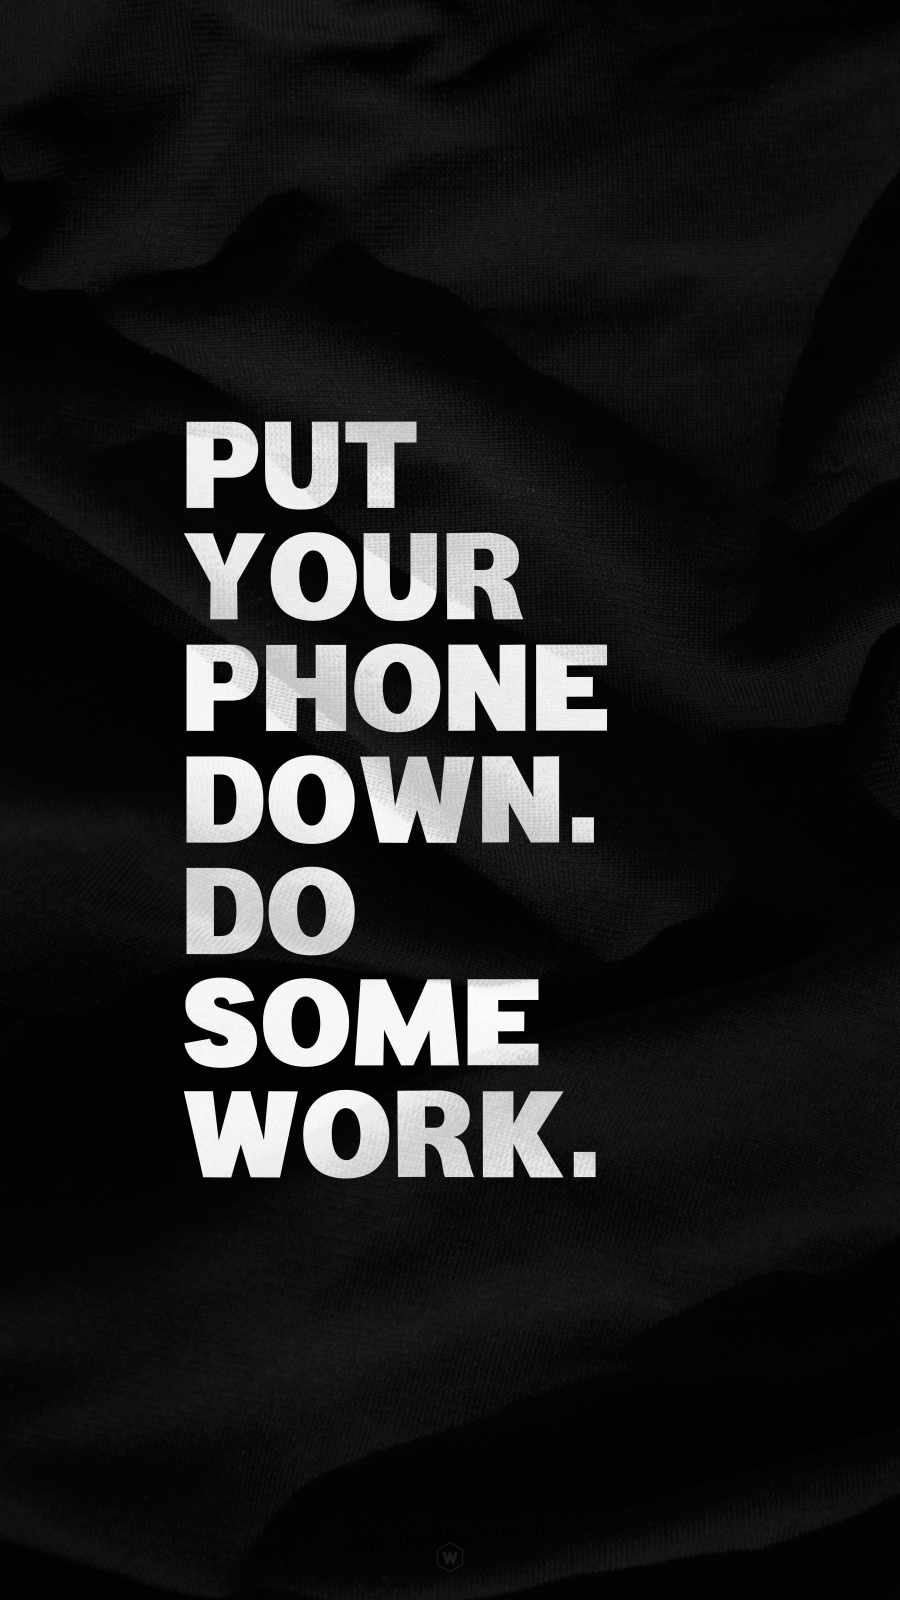 Do Some Work 4K IPhone Wallpaper - IPhone Wallpapers : iPhone Wallpapers